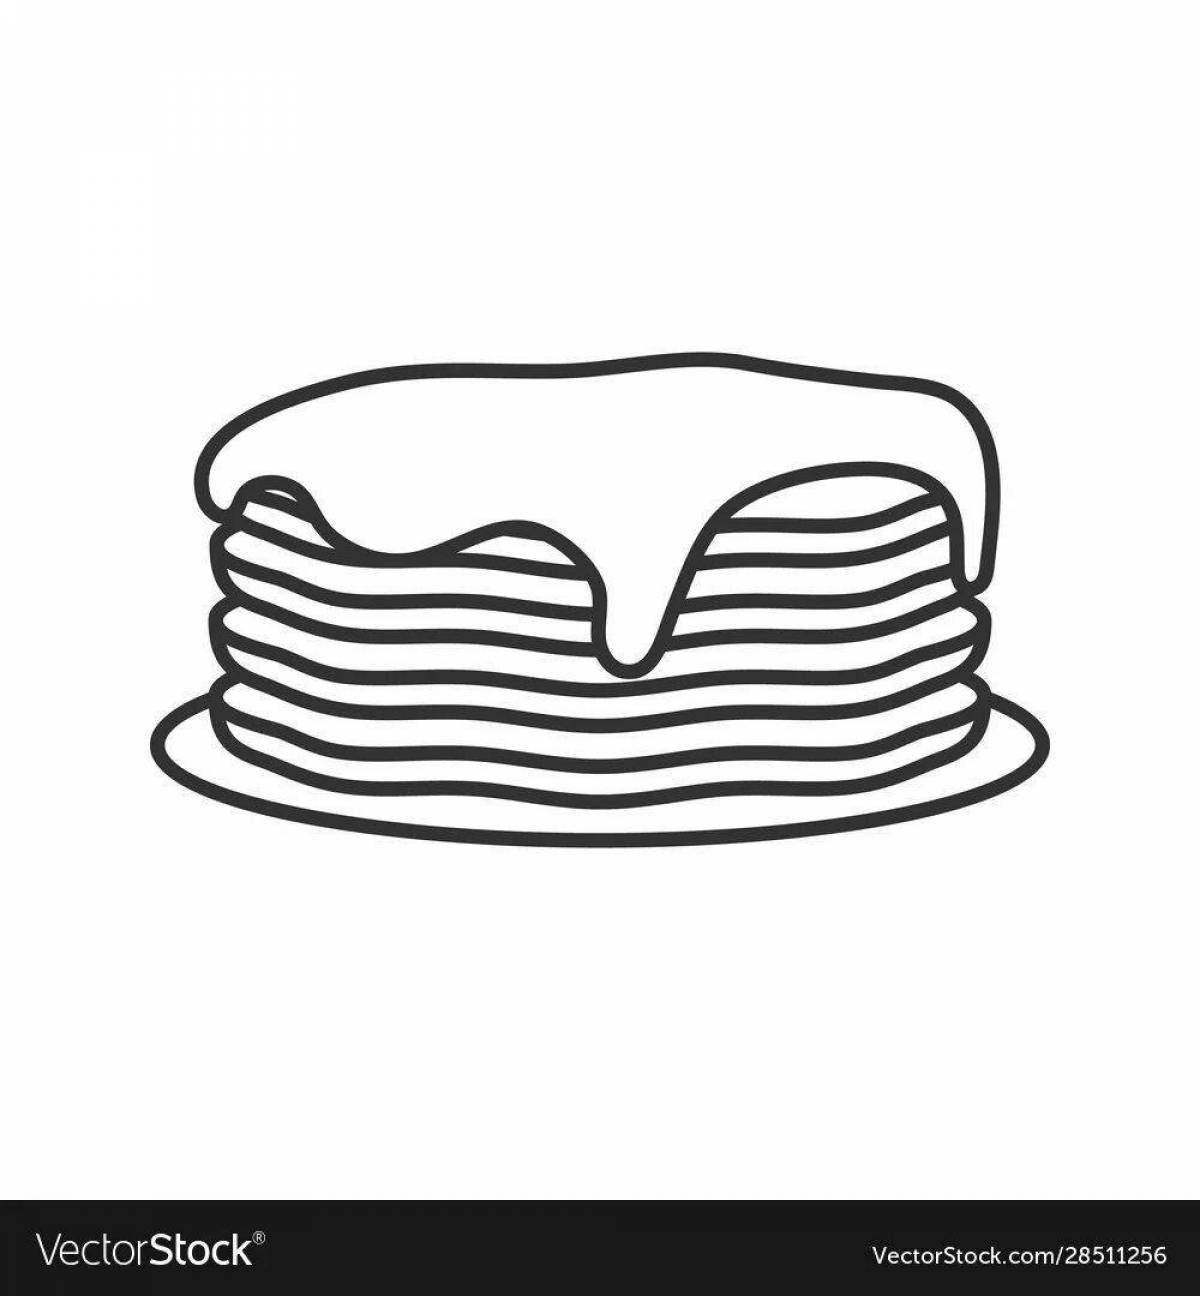 Amazing pancakes coloring pages for kids